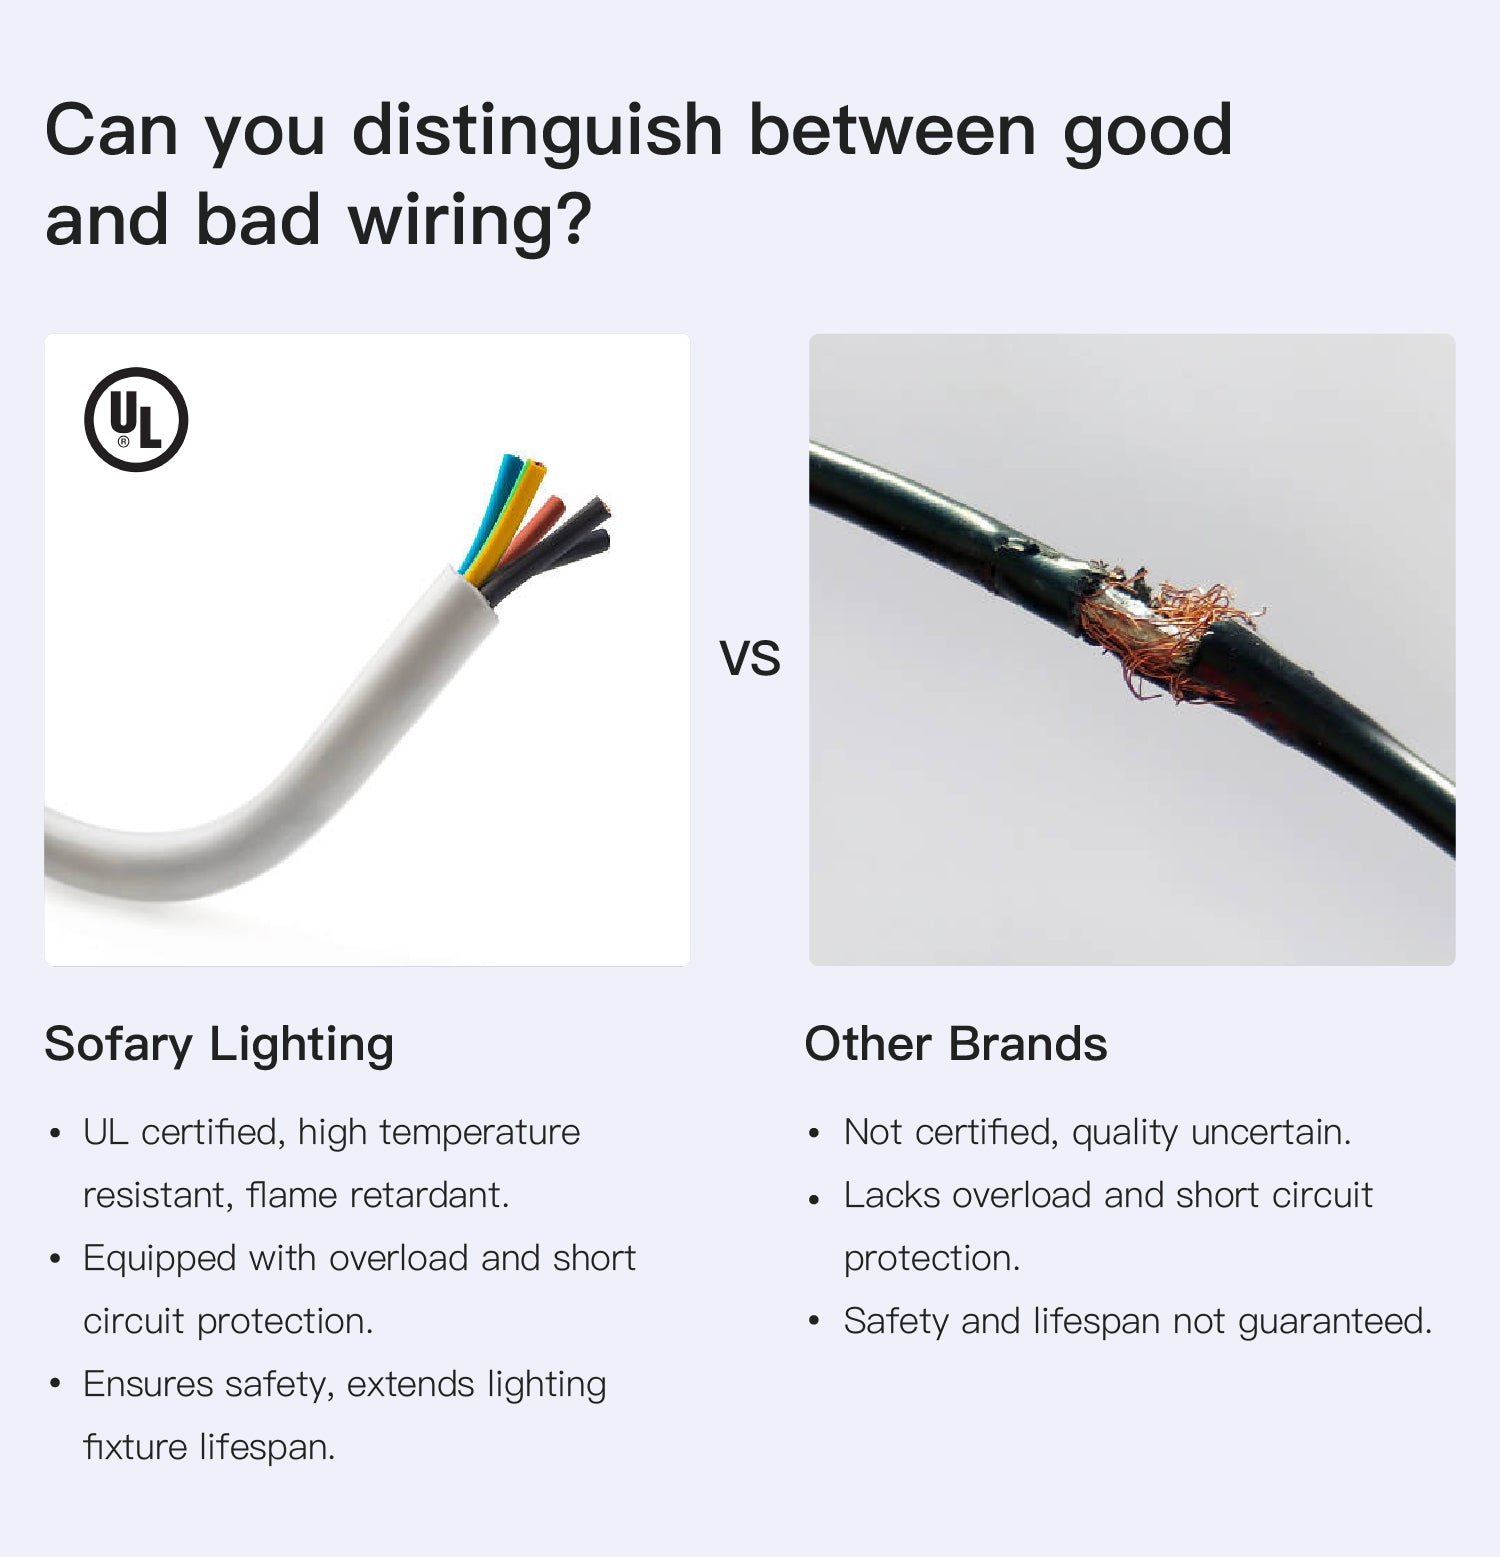 Can you distinguish between good and bad wiring?